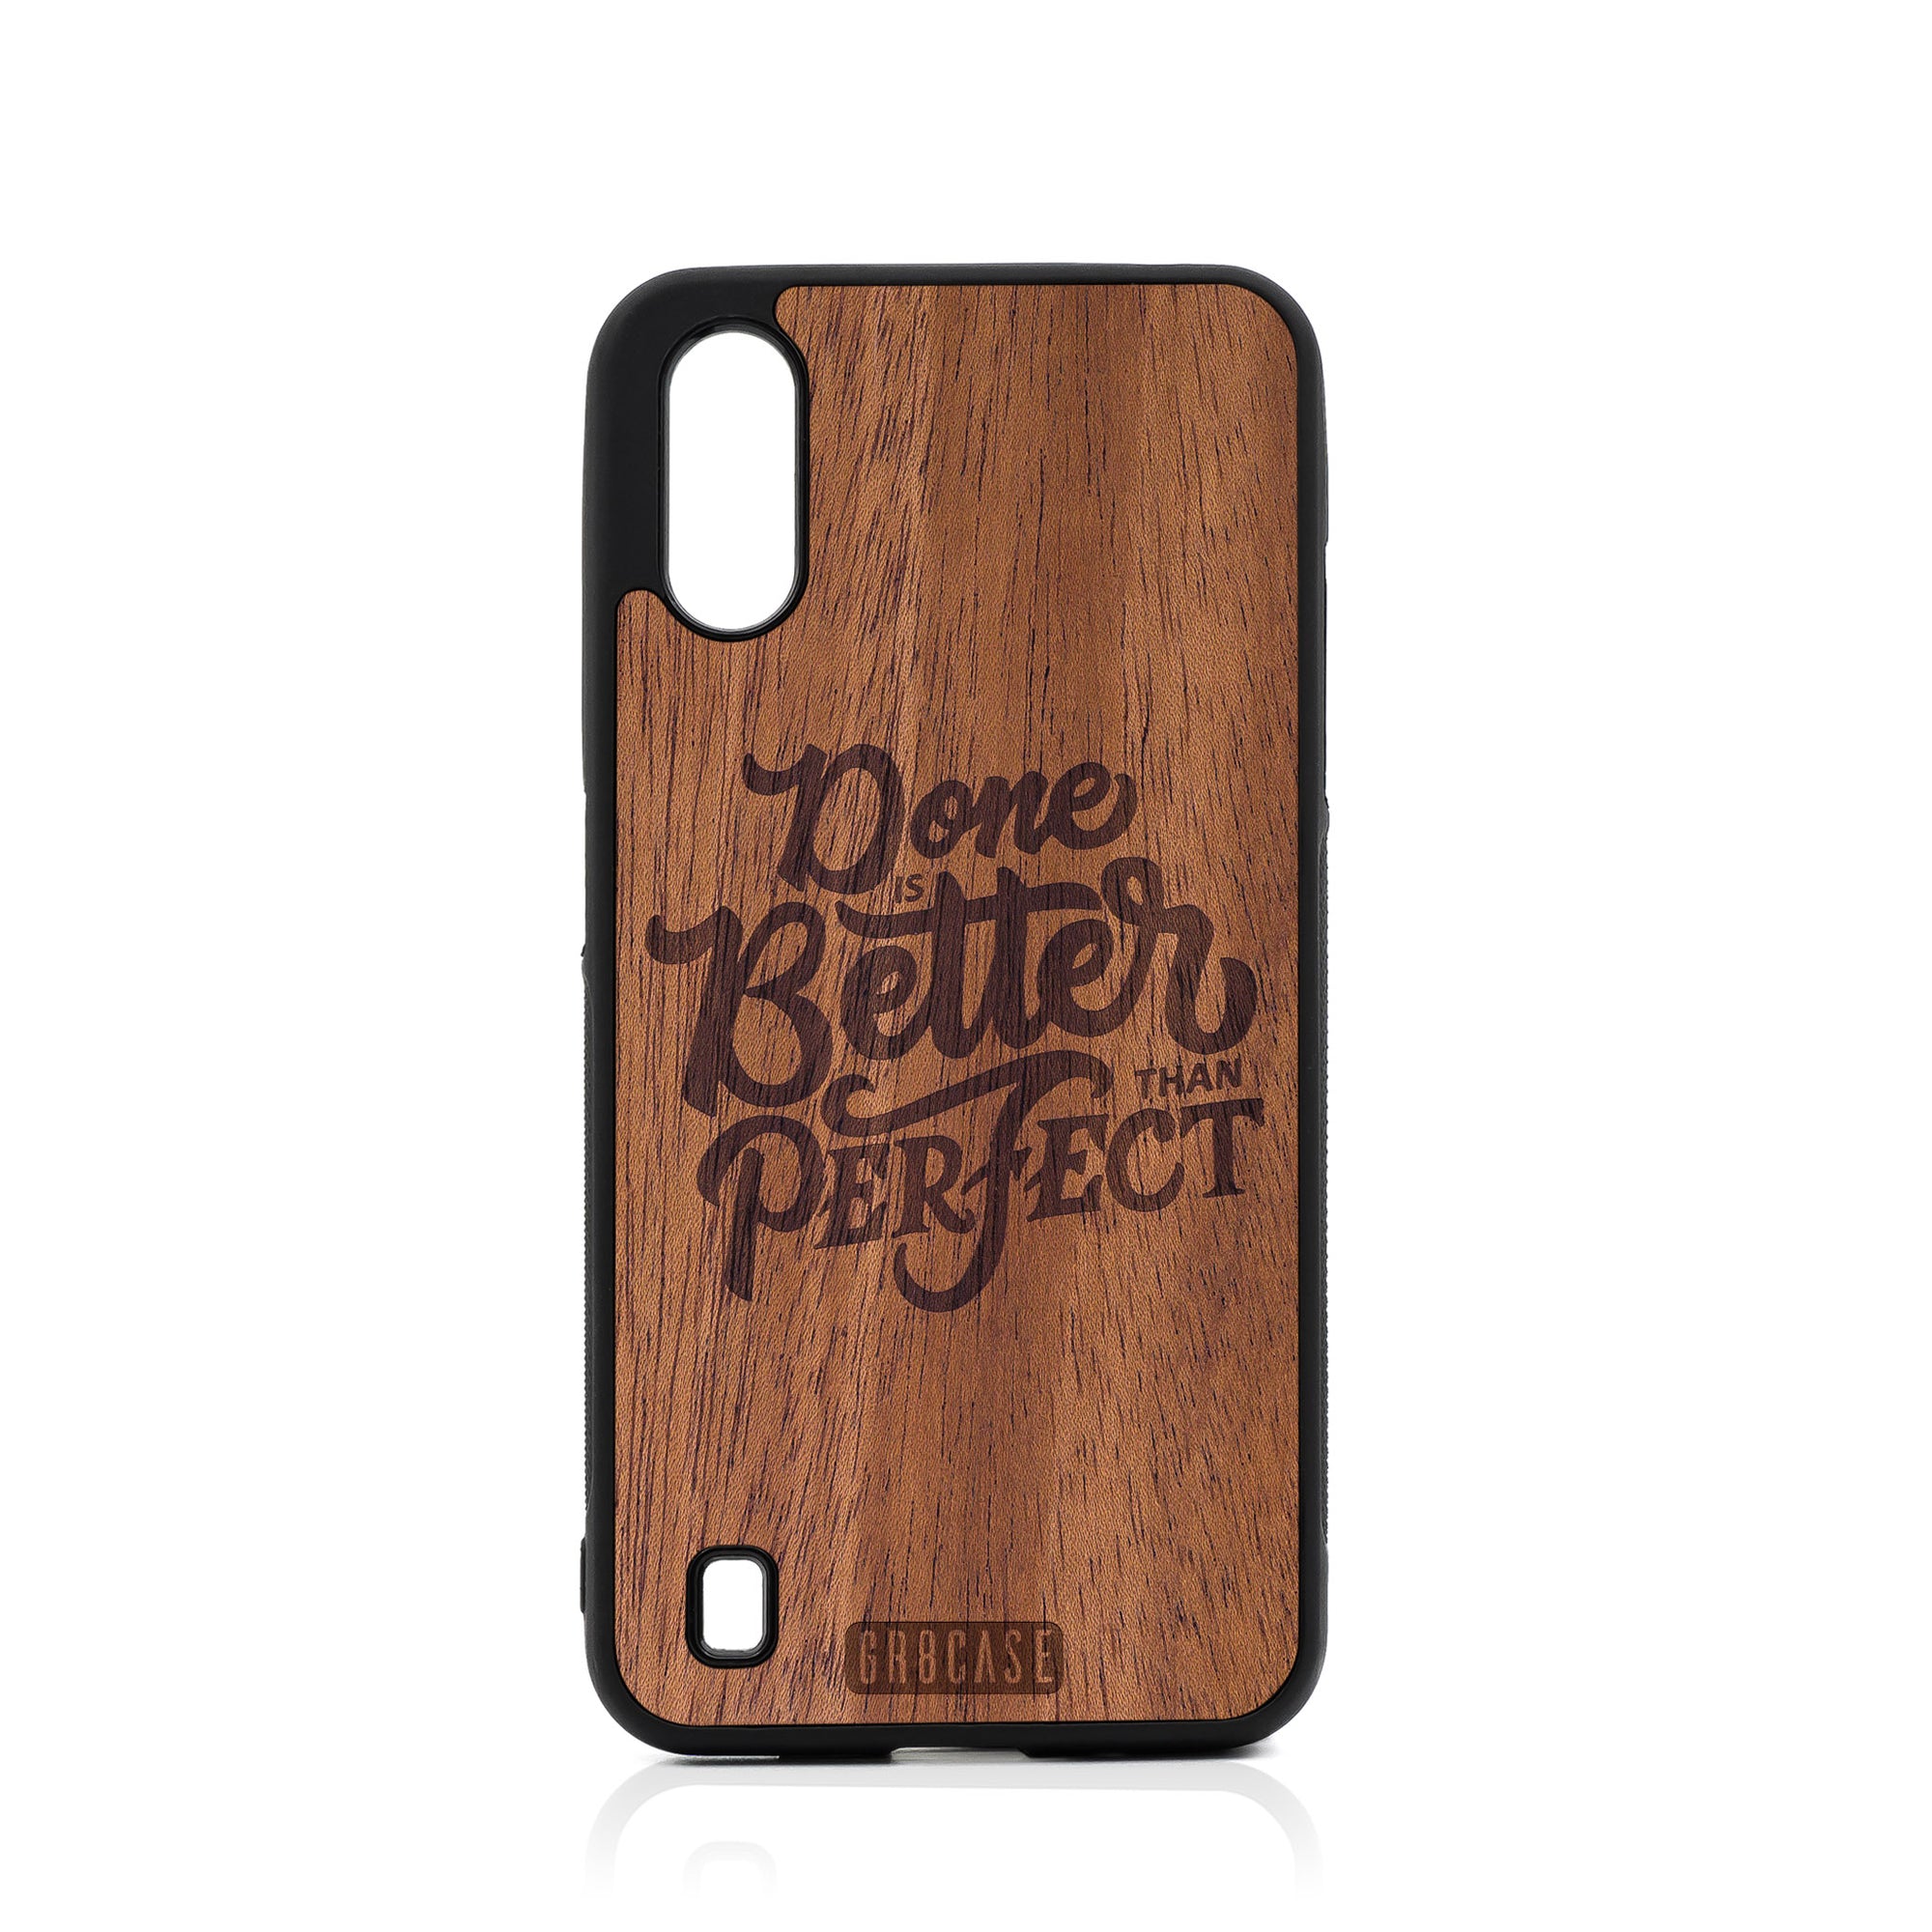 Done Is Better Than Perfect Design Wood Case For Samsung Galaxy A01